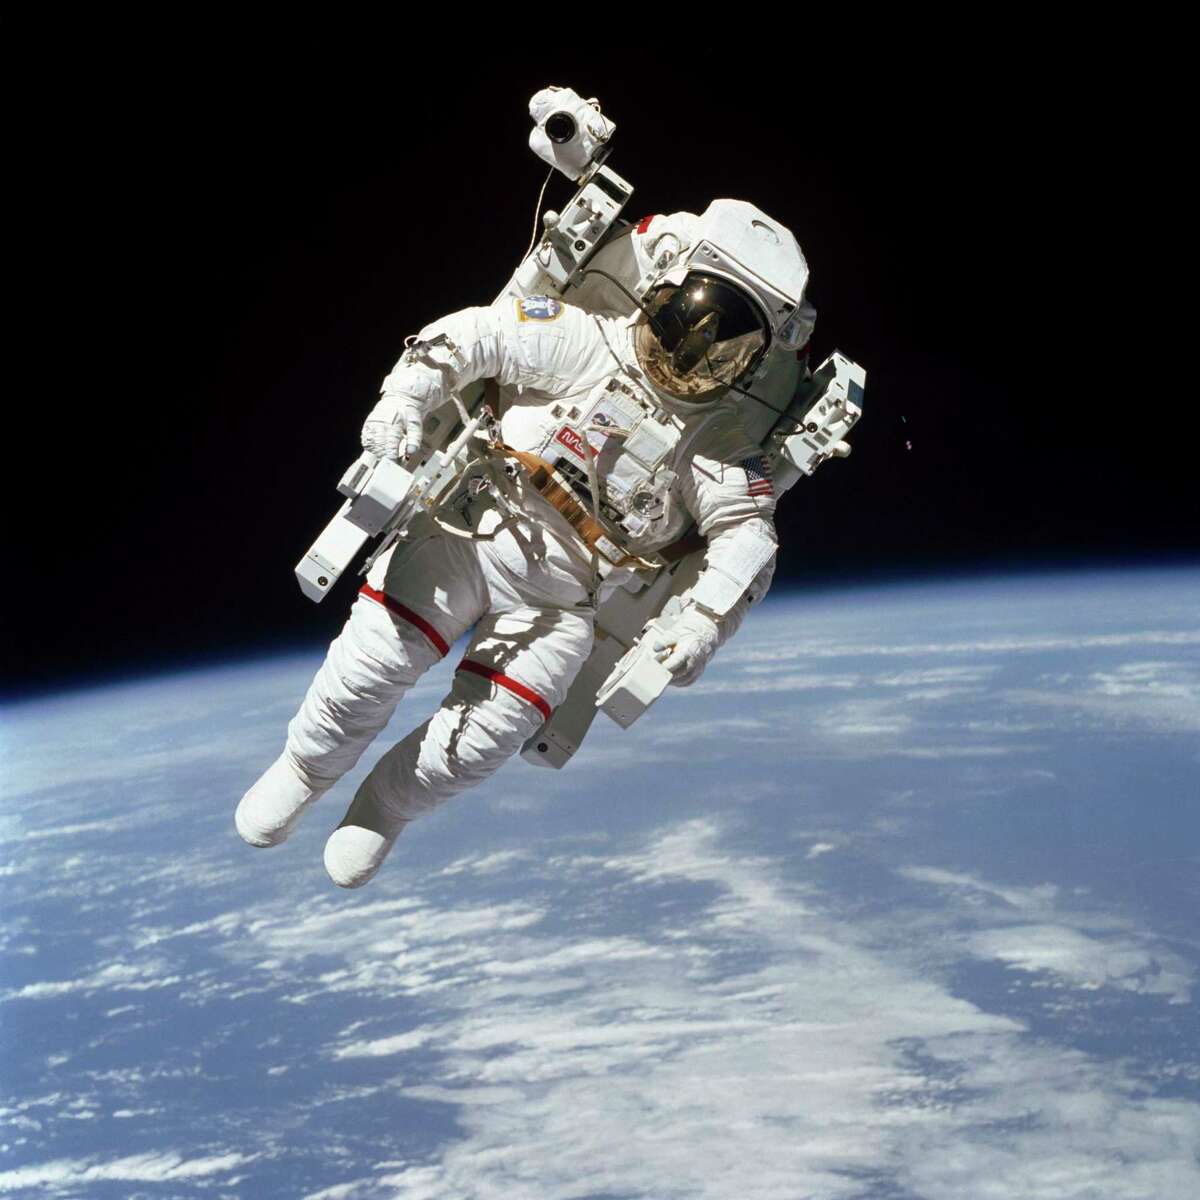 NASA and other space agencies throughout the world have made some truly bizarre discoveries in the 20th and 21st centuries. Click ahead to check out some of them. >>> Above: This Feb. 7, 1984 file photo made available by NASA shows legendary astronaut Bruce McCandless II walking in space, with our home planet Earth in the background.